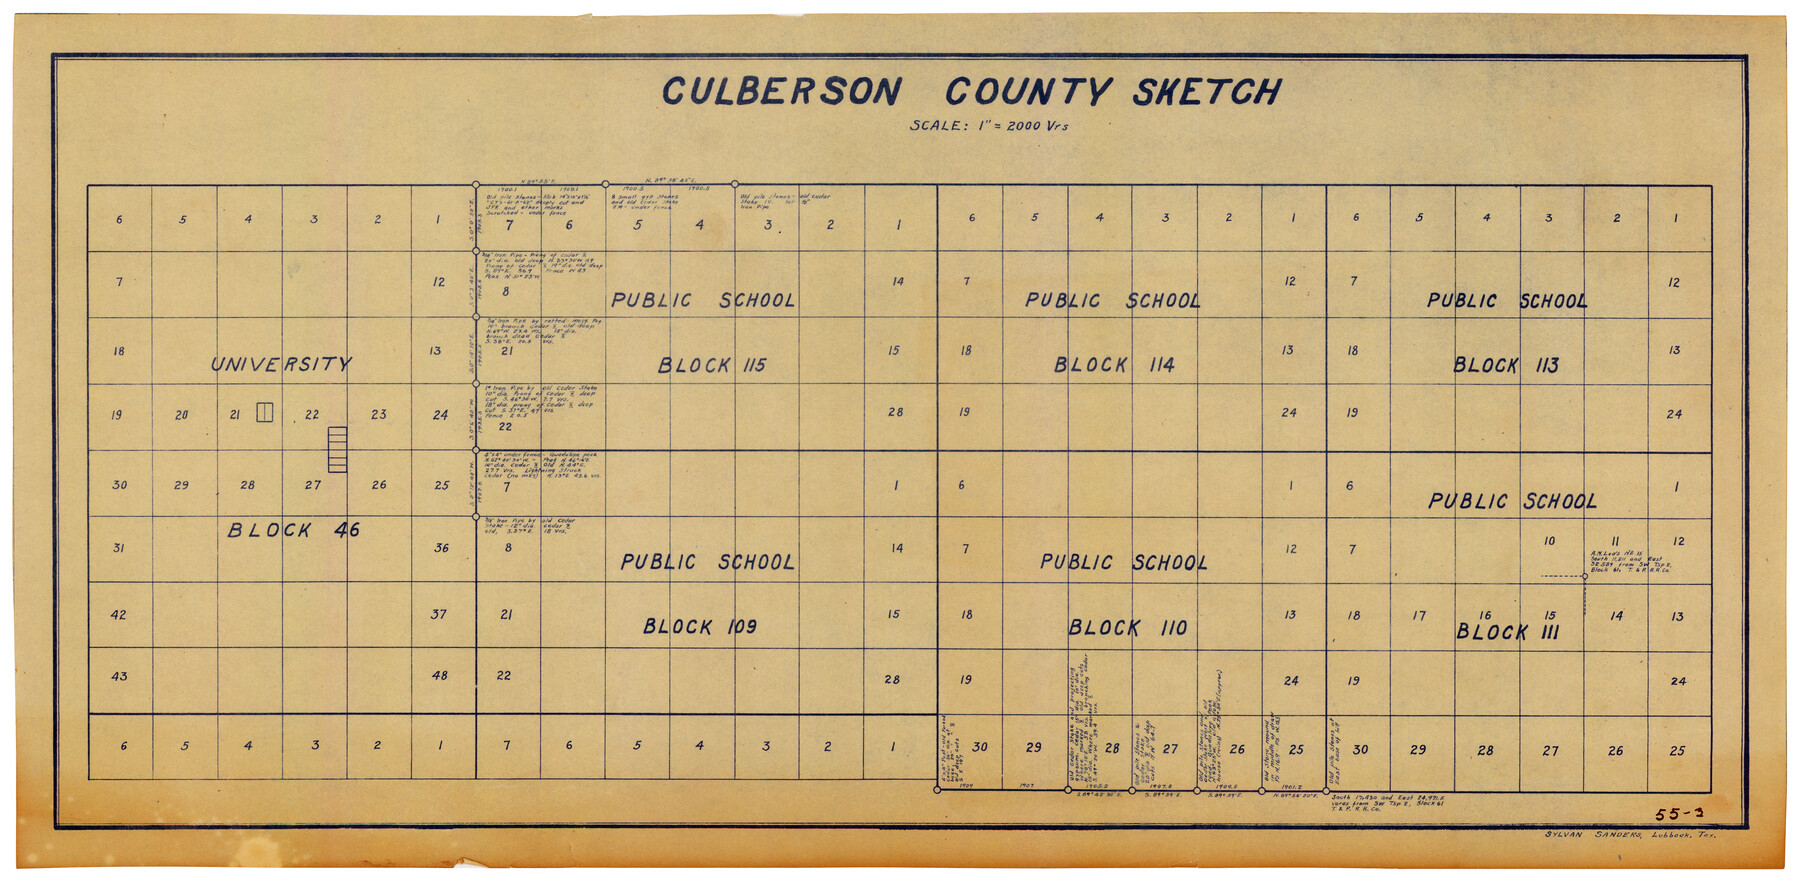 90500, Culberson County Sketch [showing PSL Blocks 109-111, 113-115 and University Block 46], Twichell Survey Records